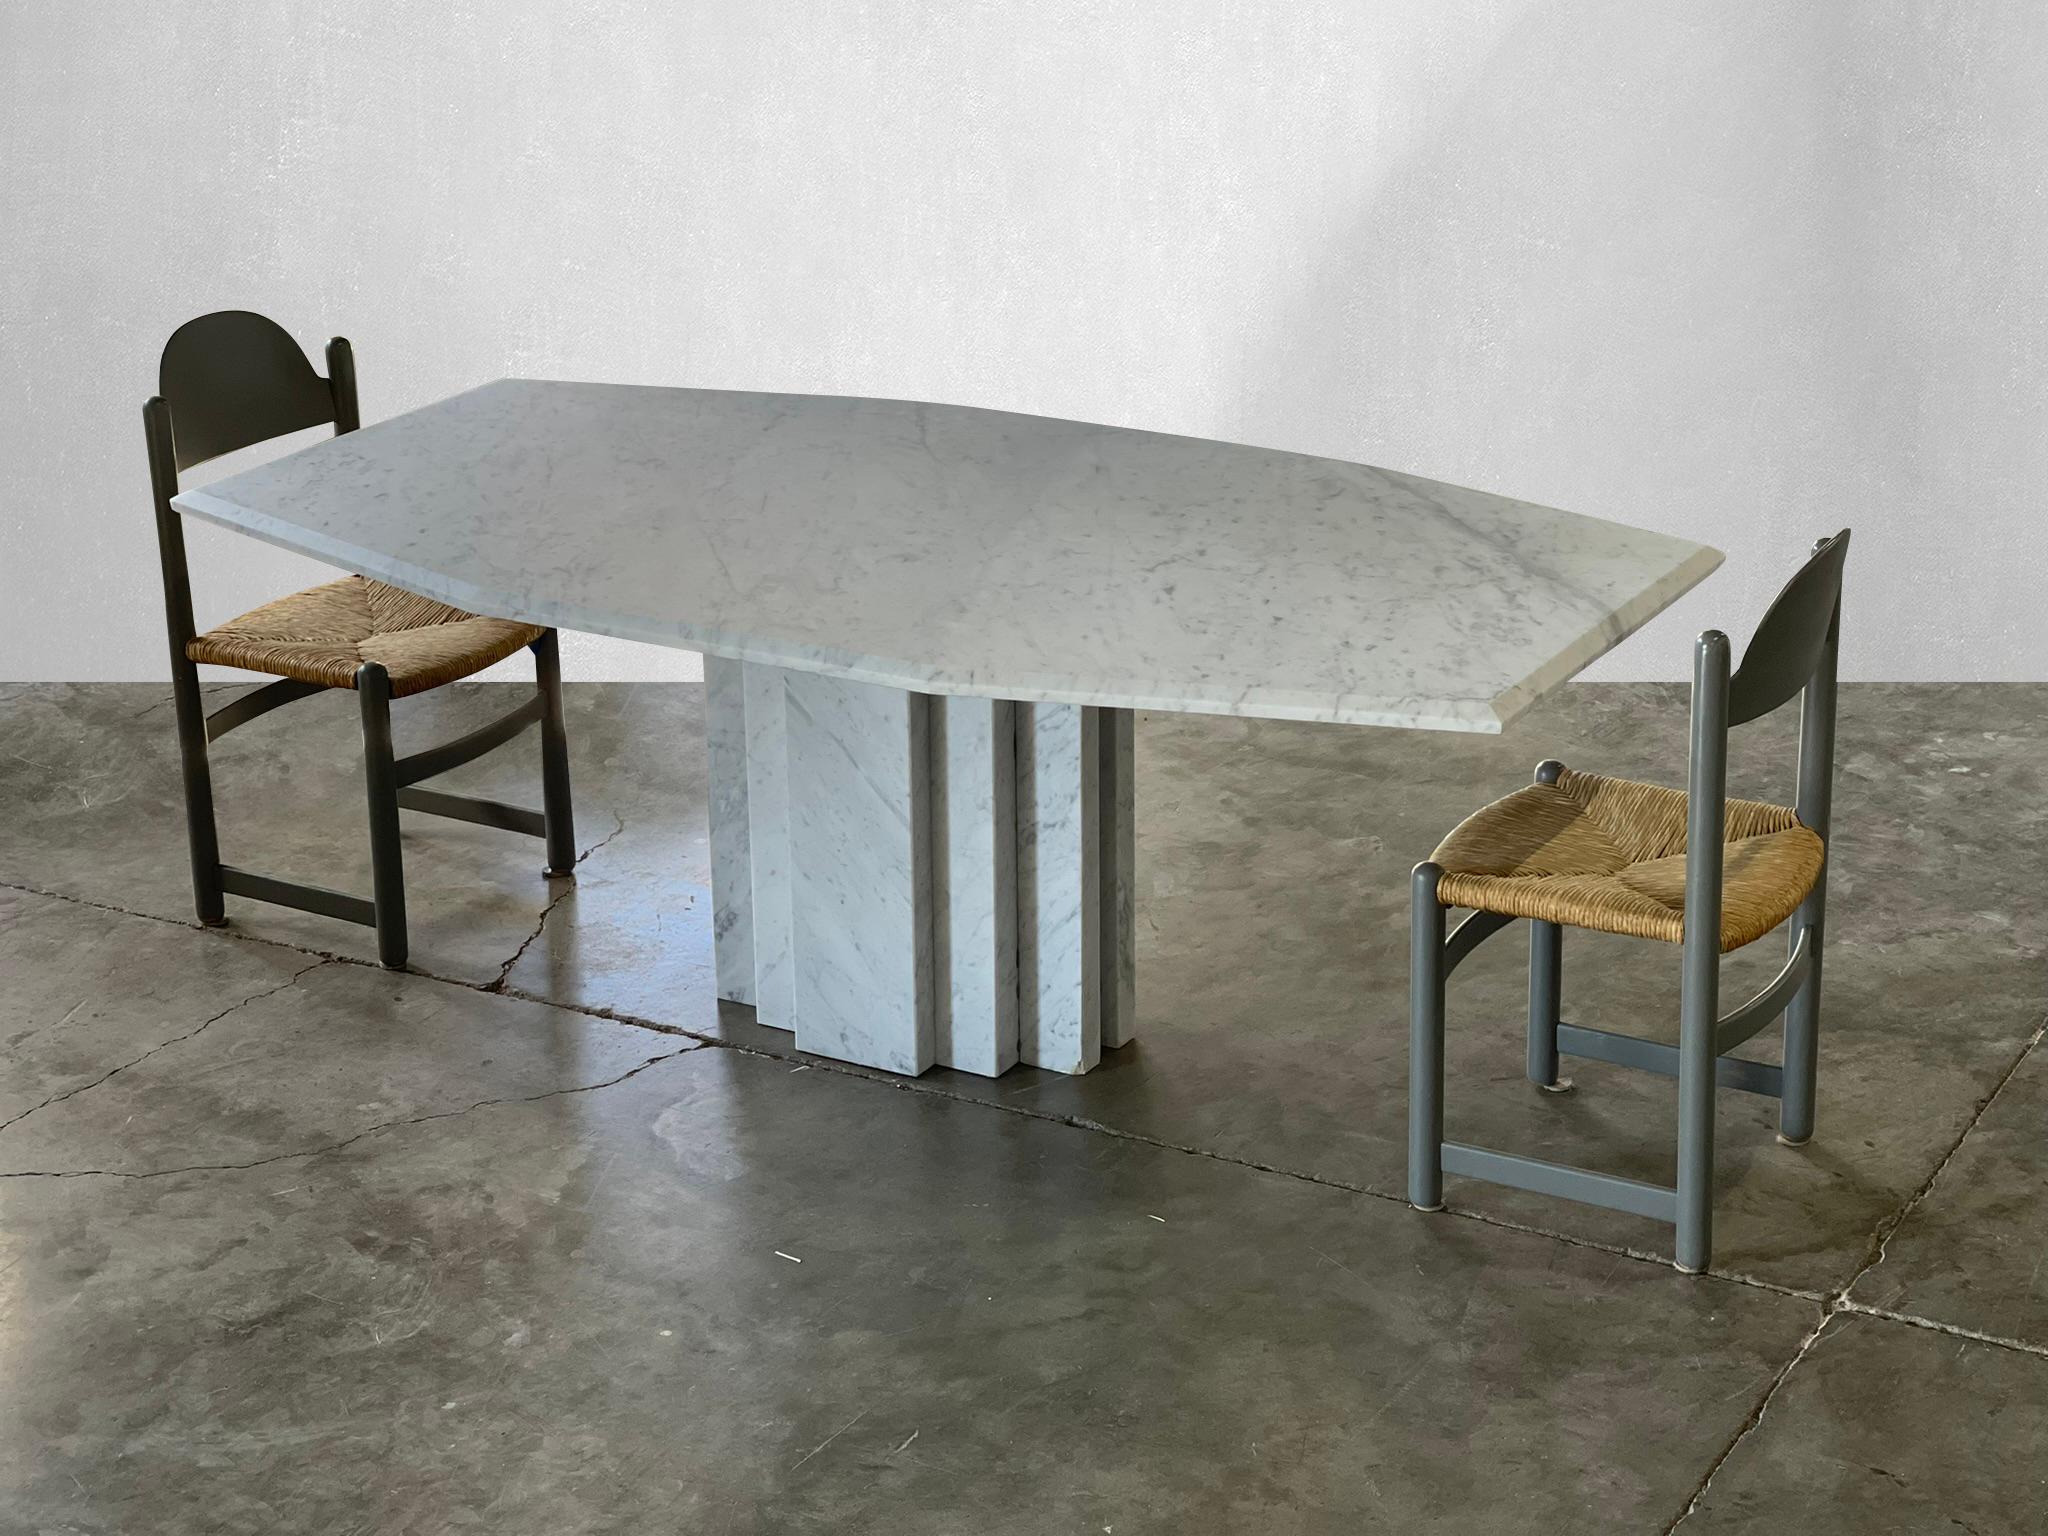 Monumental Carrara marble dining table with architectural base.

Stunning veining throughout the solid Carrara marble top and base. This table has a unique tapered marble top. The base is a show stopper. Comfortably seats 8 people.

 Has been